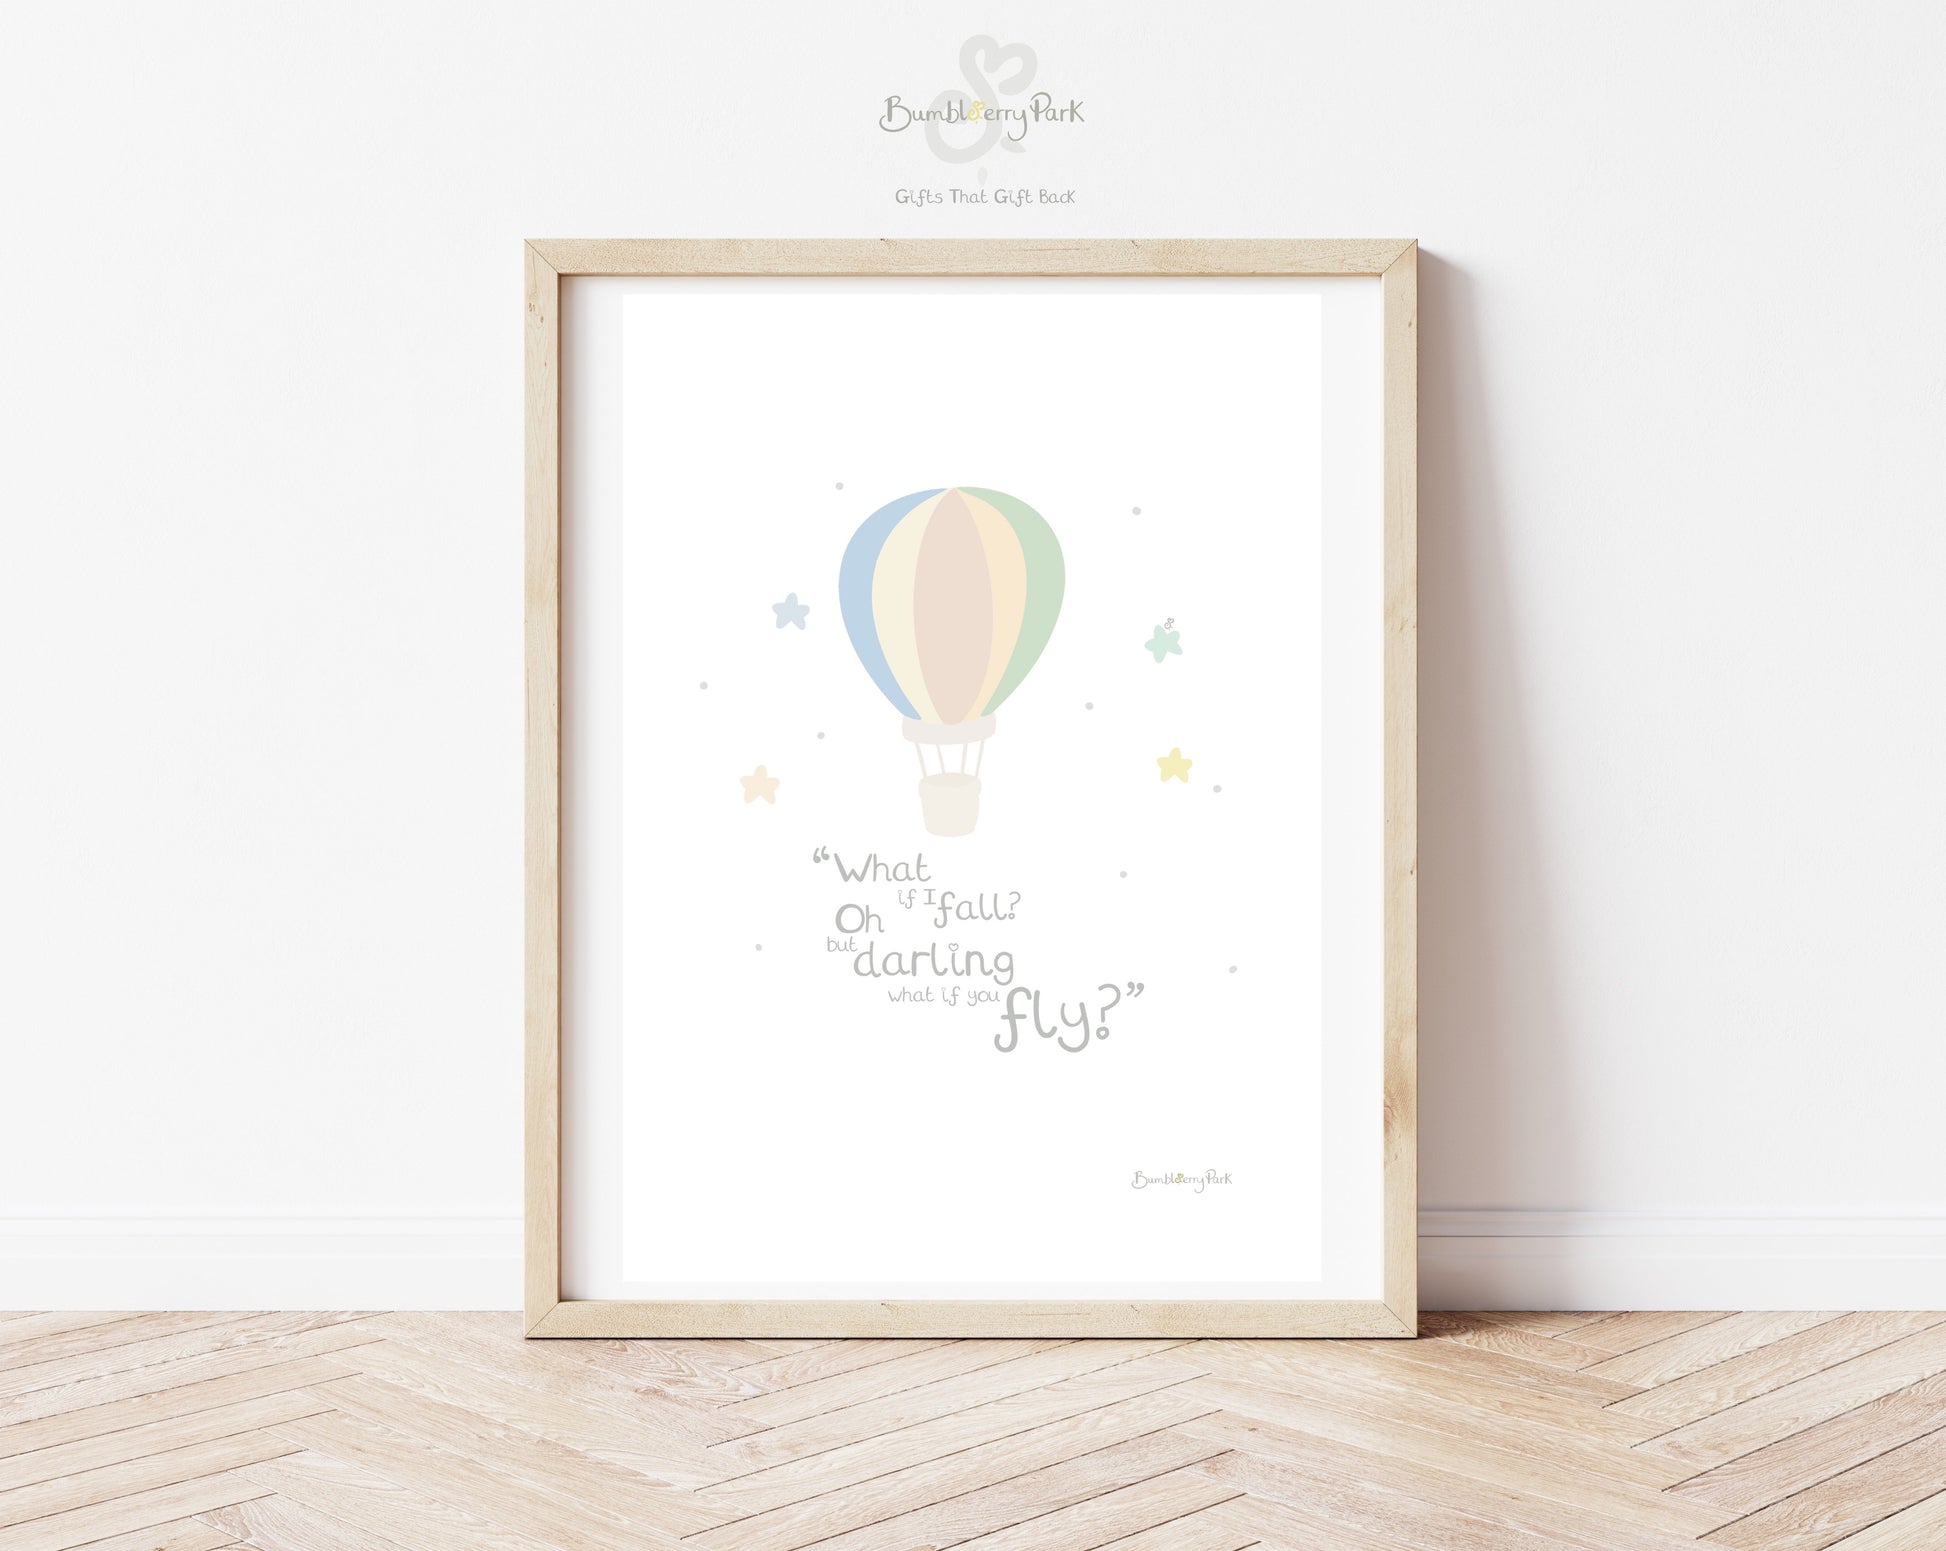 nursery wall print hot air balloon wall print with quote "what if i fall oh but darling what if you fly